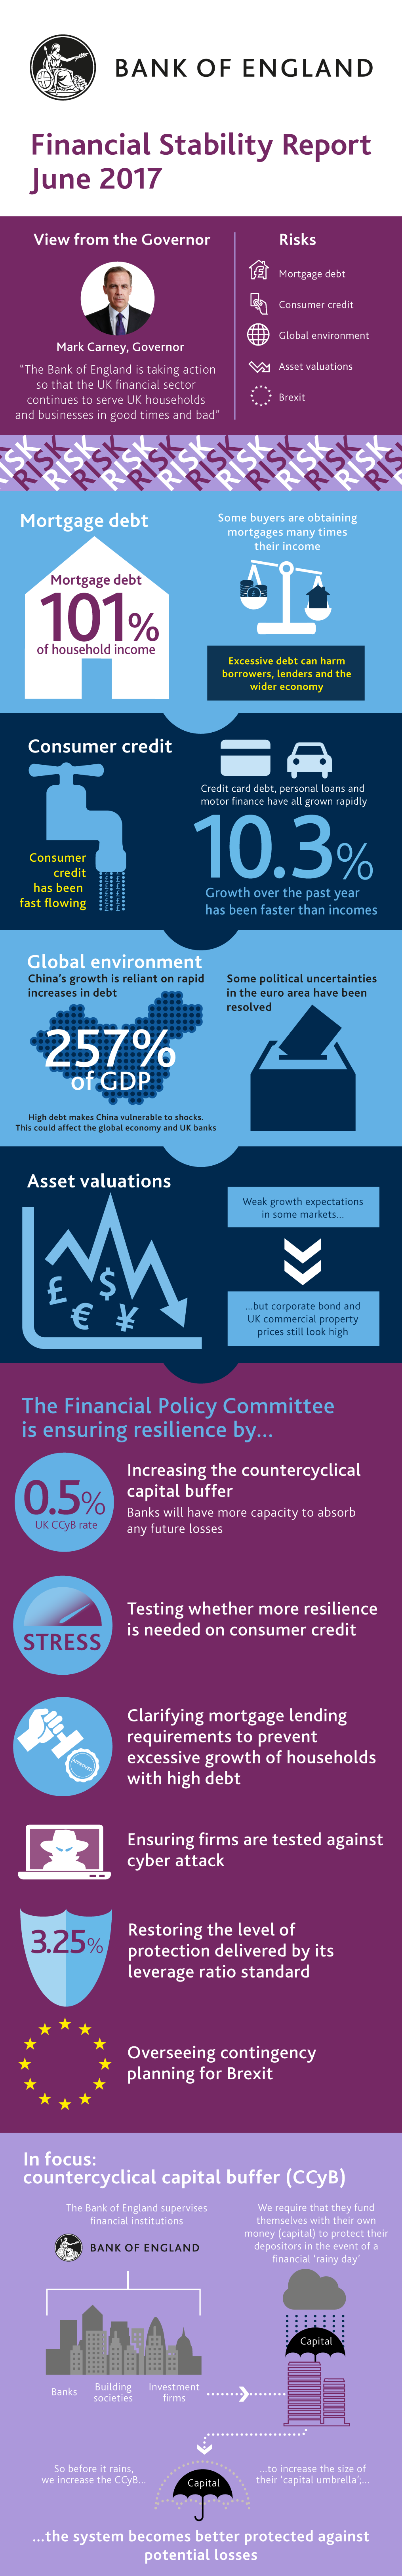 Visual summary of the Financial Stability Report - June 2017